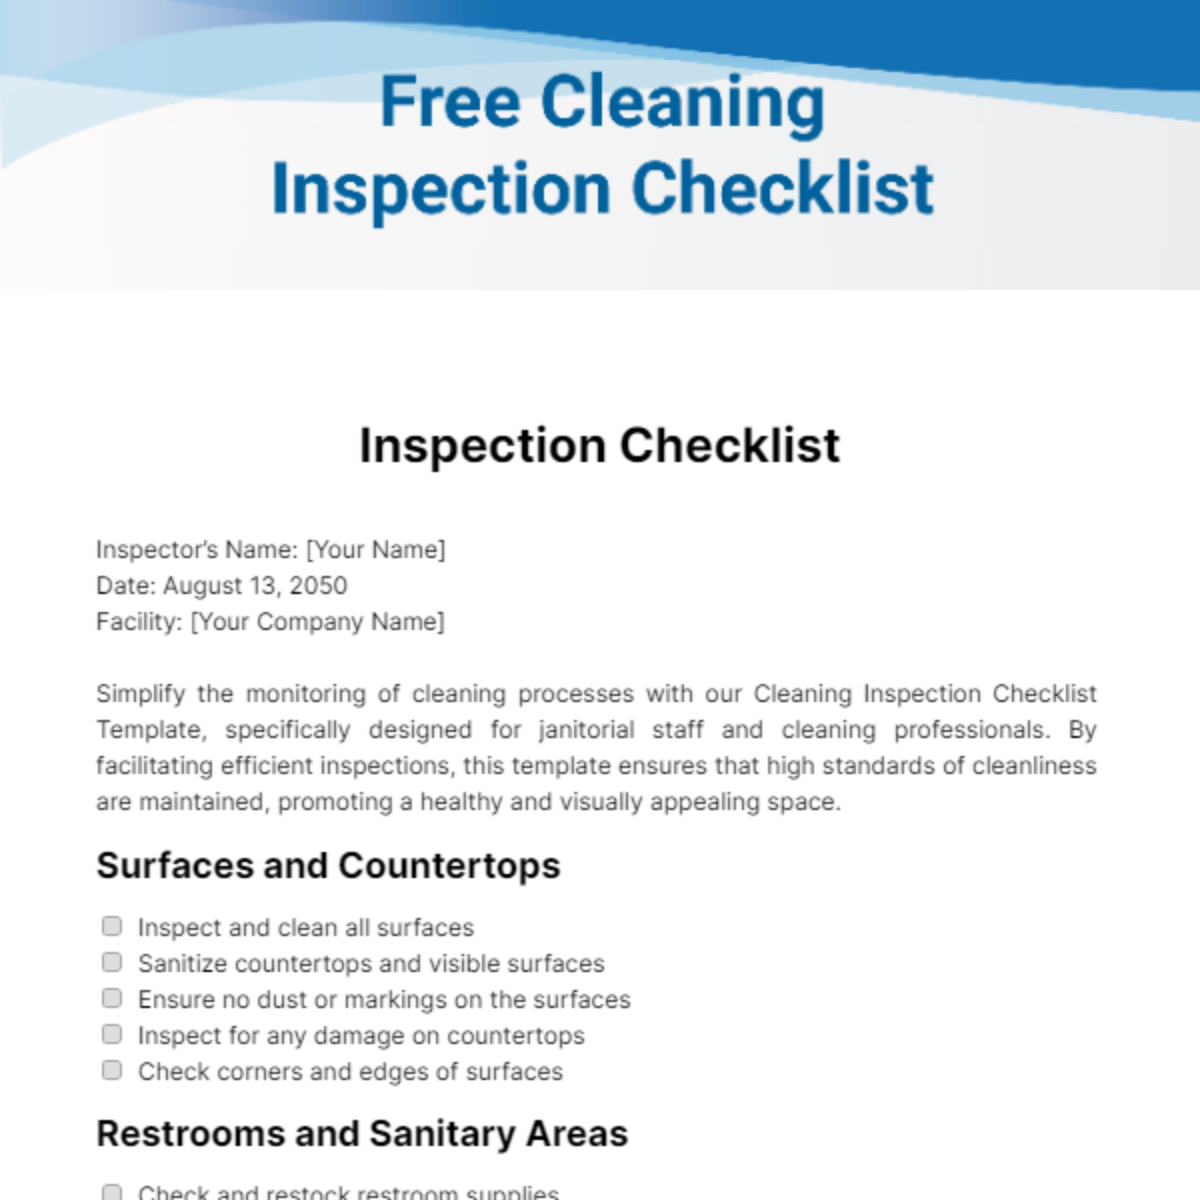 Free Cleaning Inspection Checklist Template